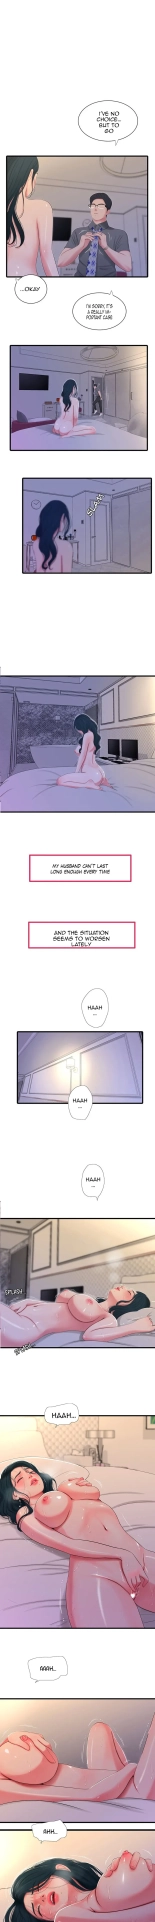 One's In-Laws Virgins Ch. 26-30 : page 10